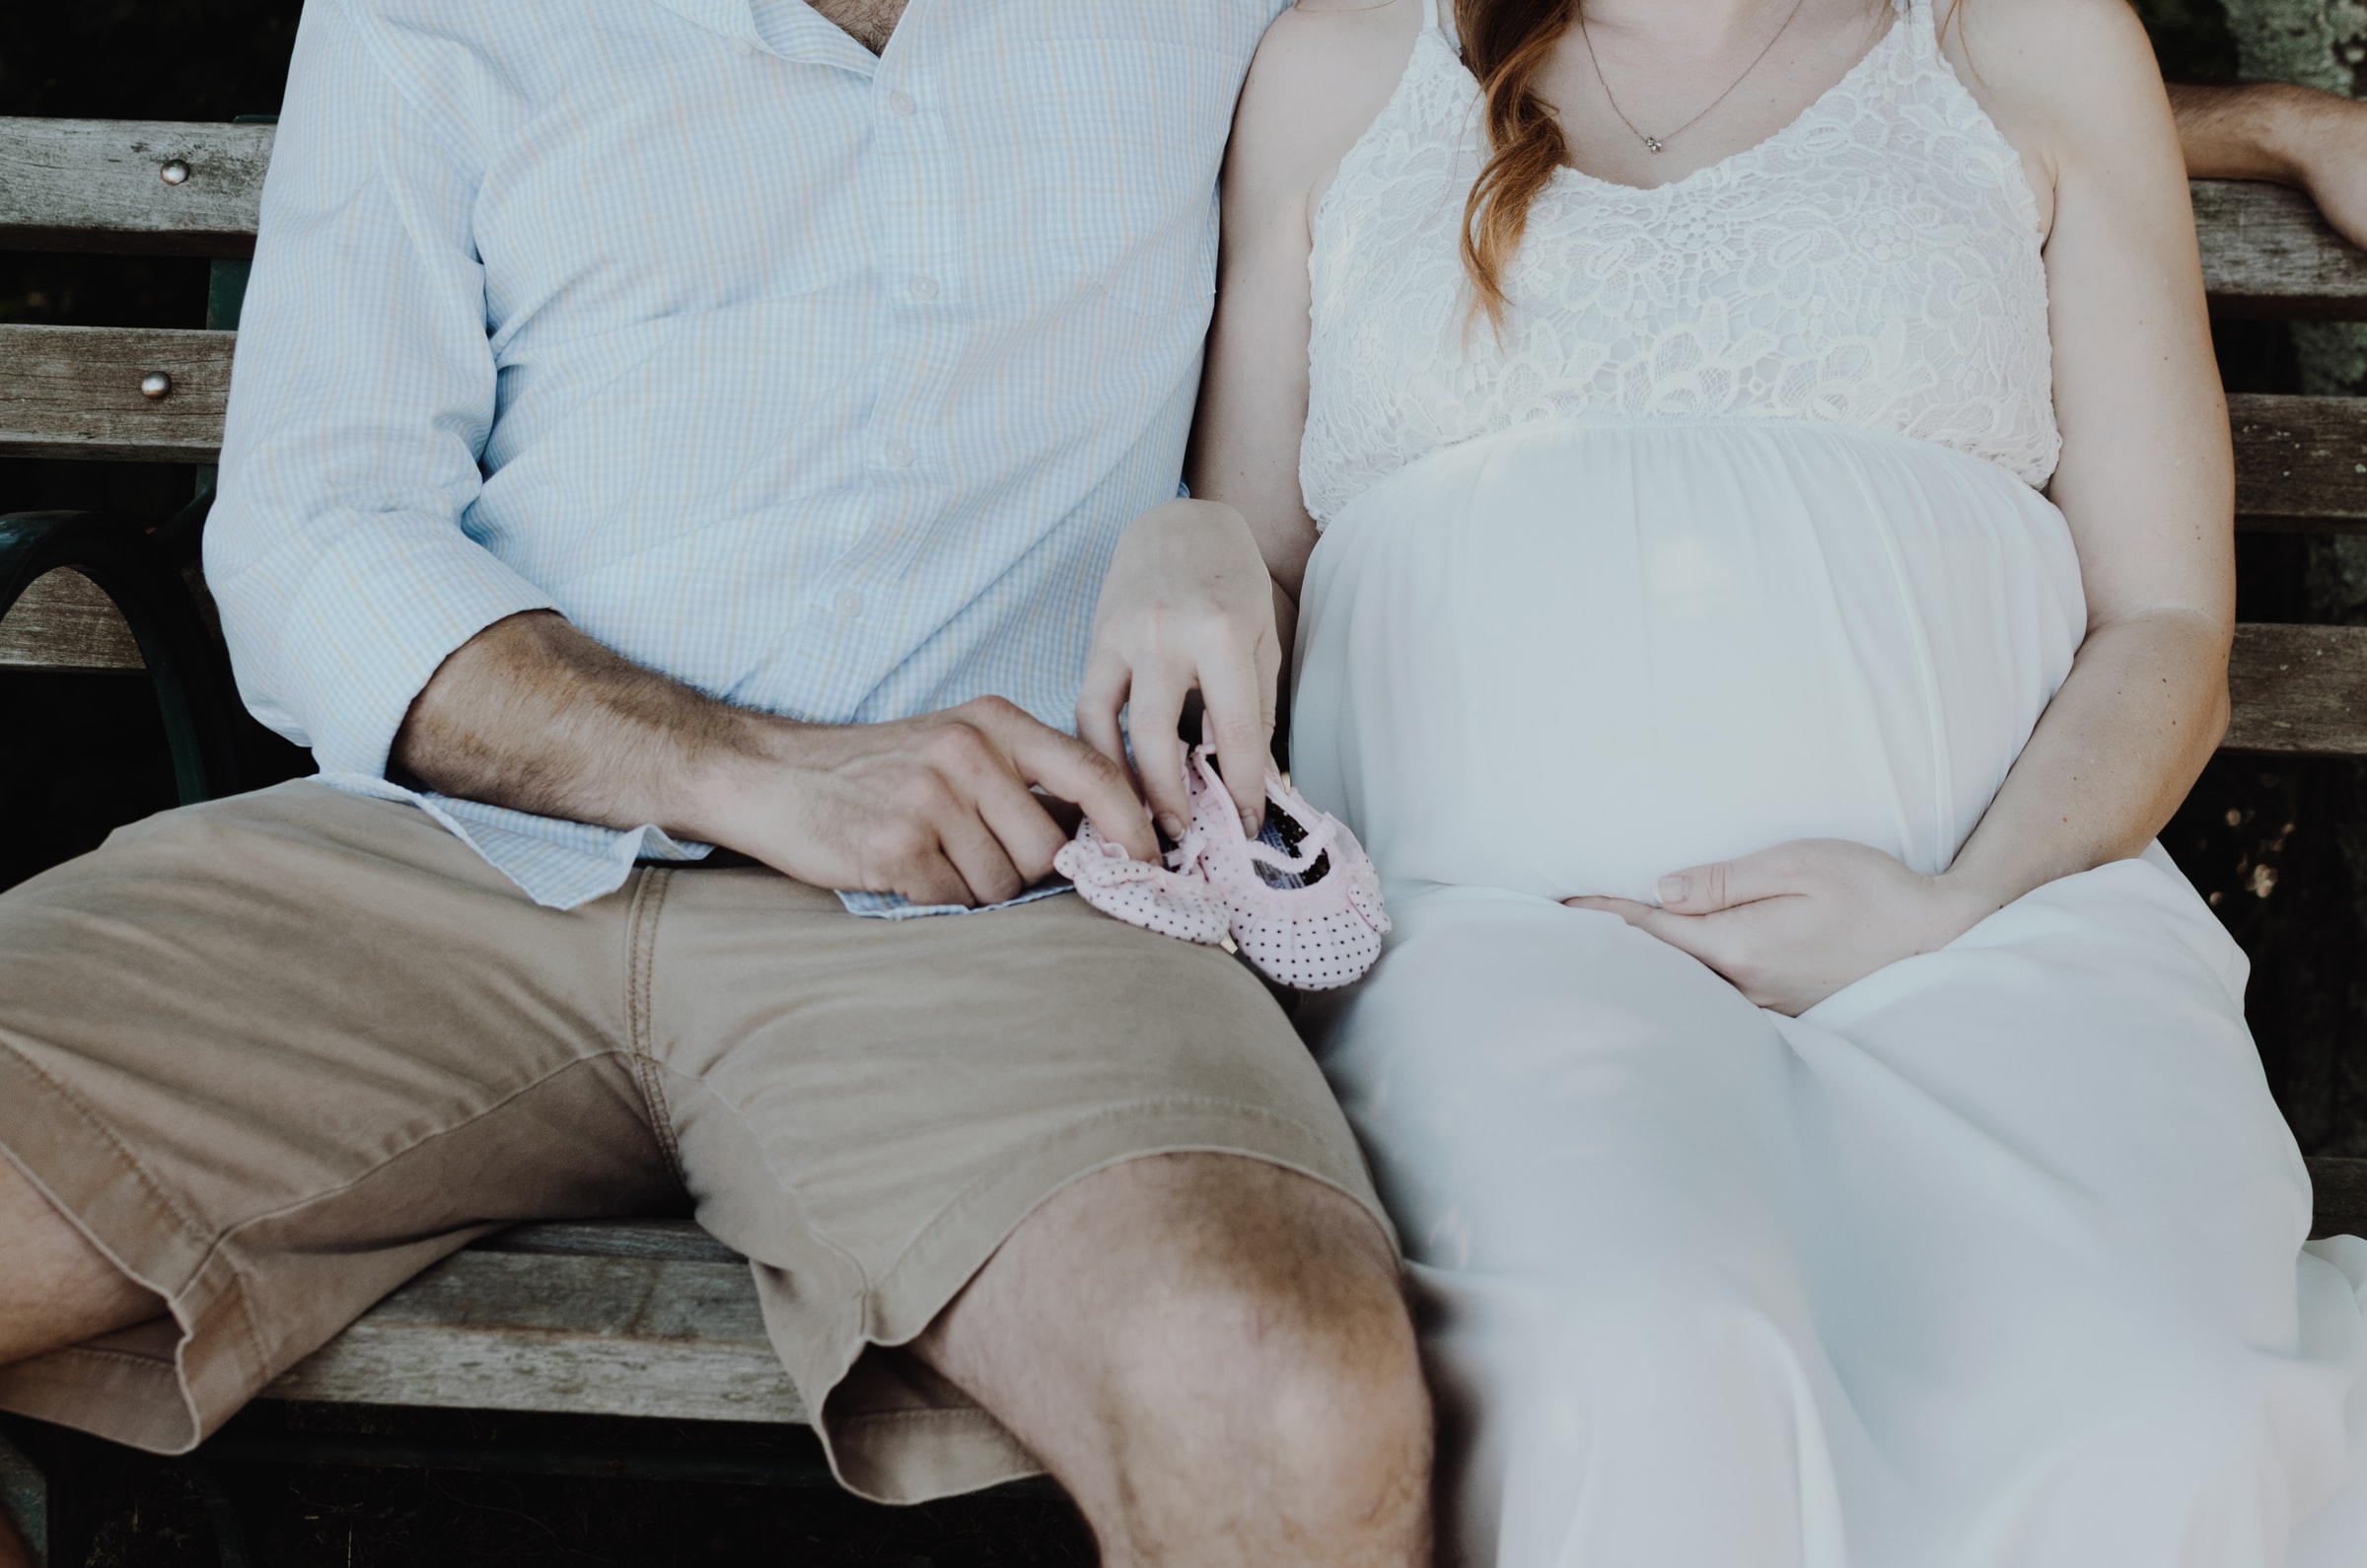 A couple sits on a bench, both holding a pair of pink baby shoes. The woman is pregnant and the man's arm is wrapped around her.